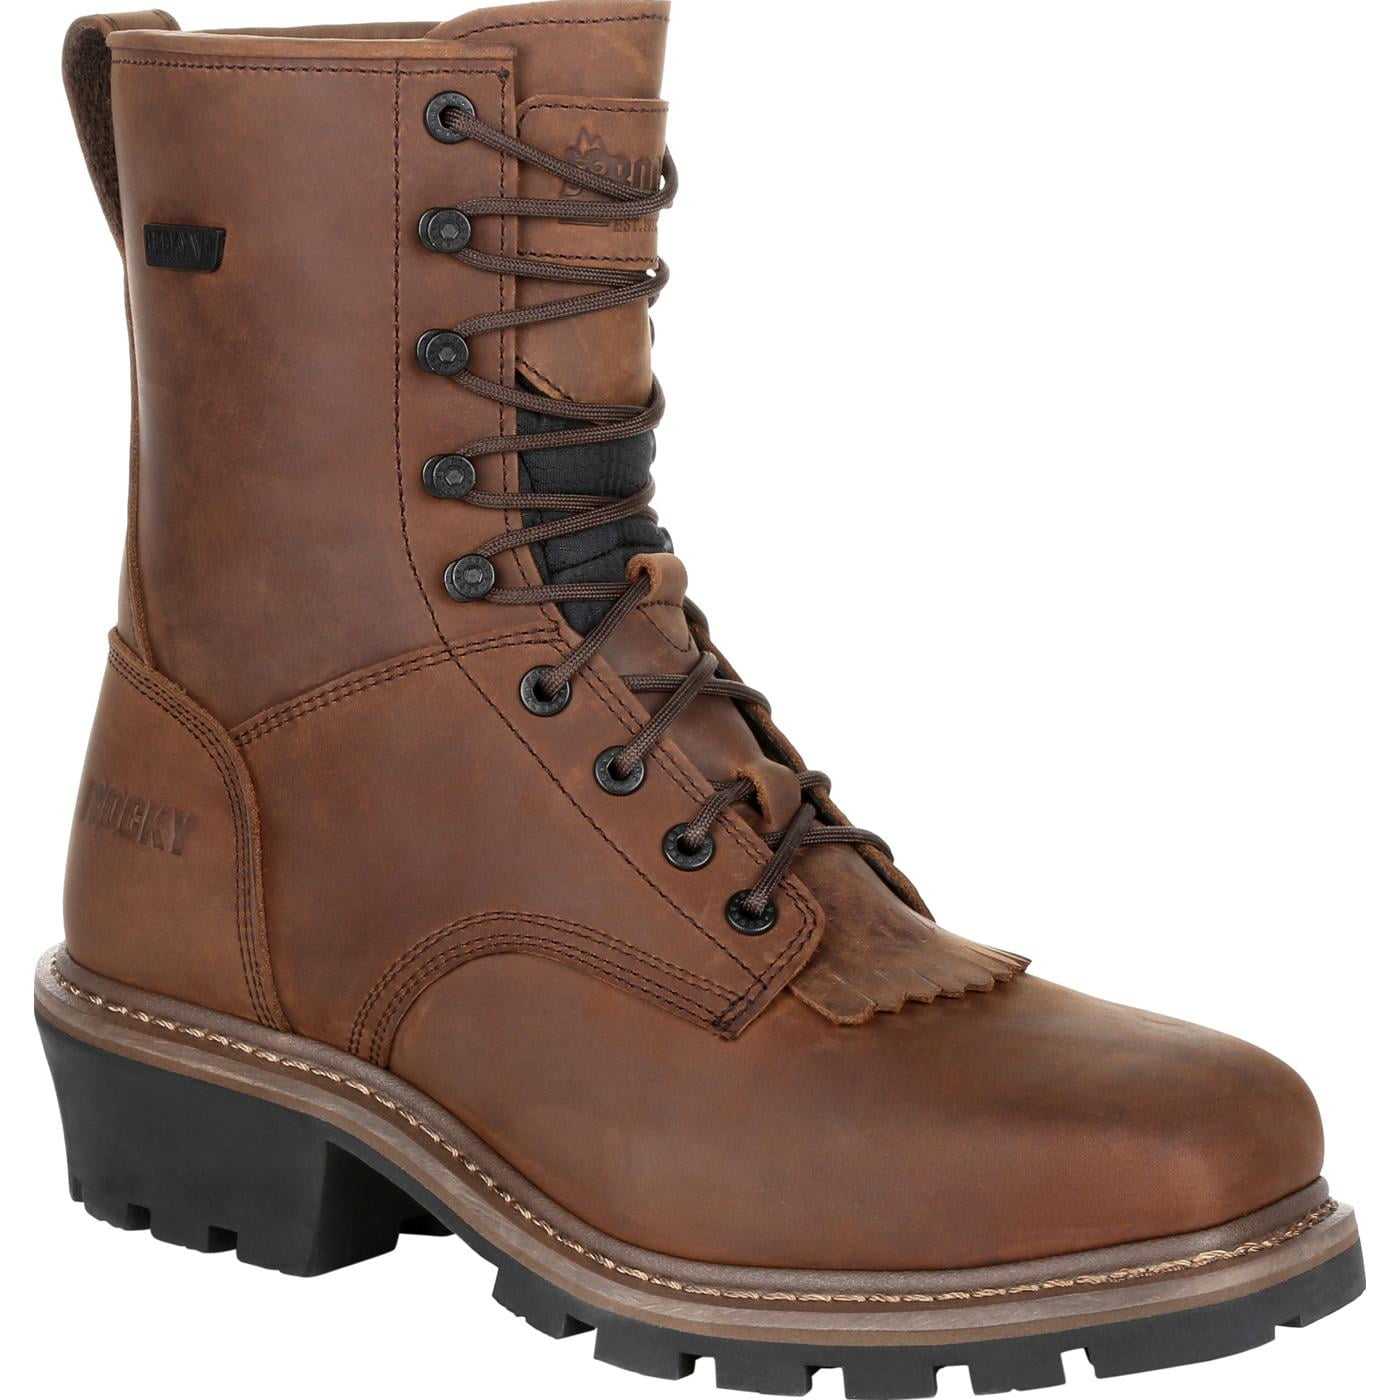 Rocky Square Toe Logger Waterproof Work Boot Size 15(M) 